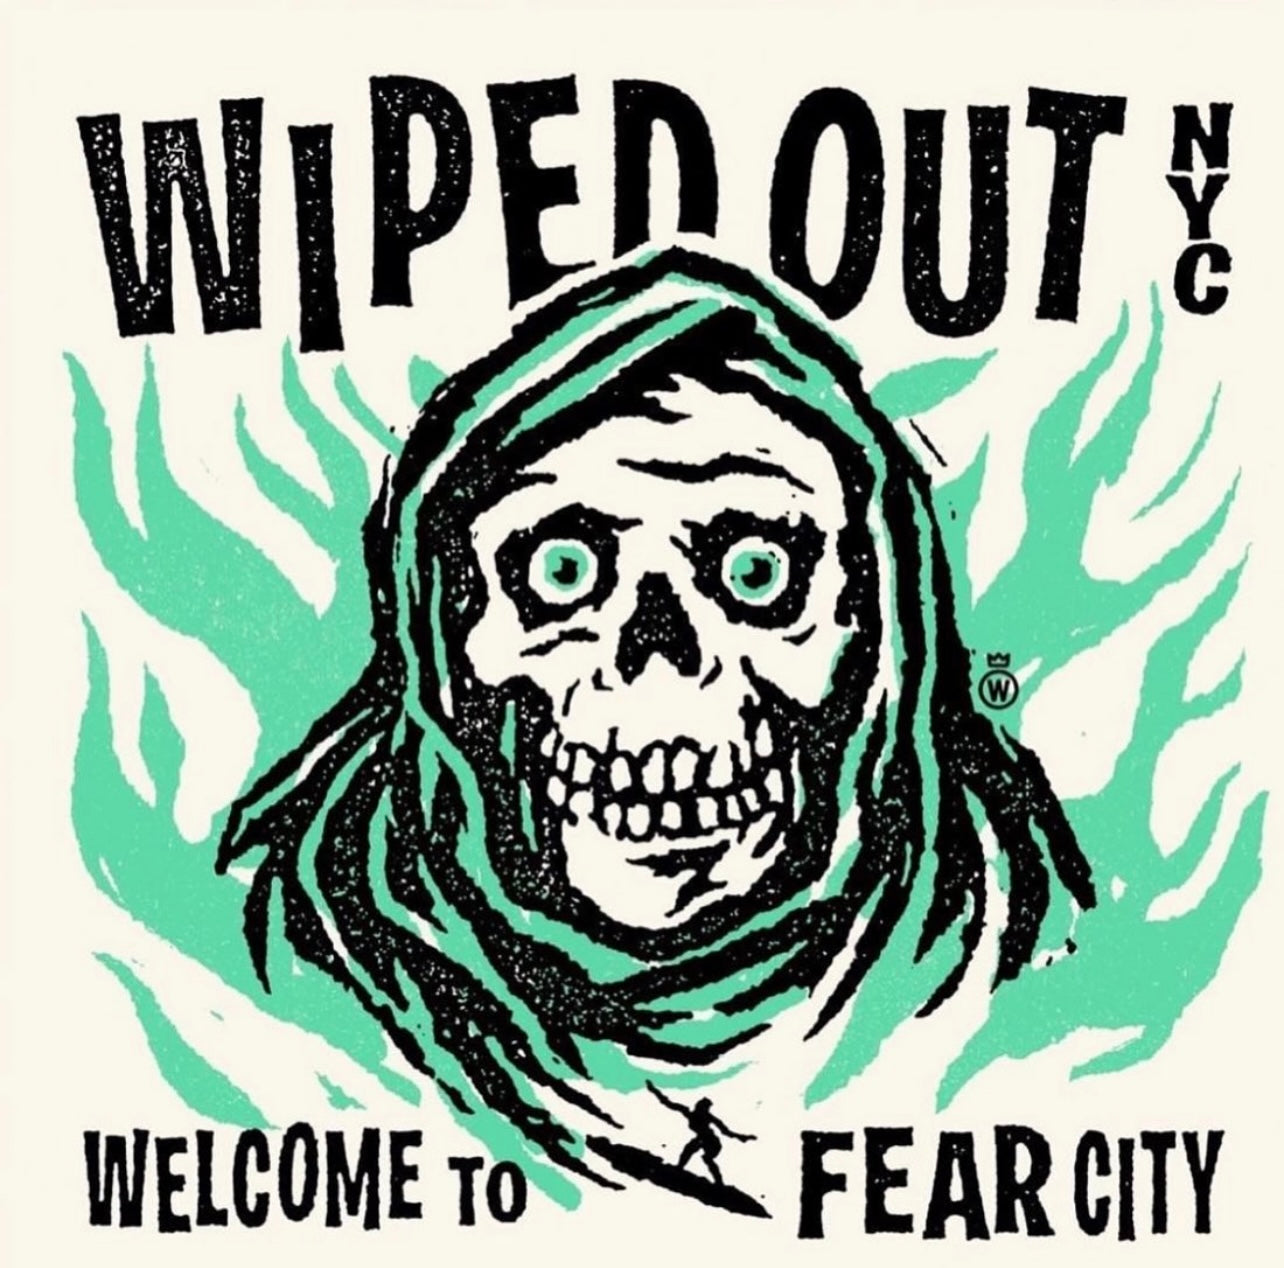 OMR-077 Wiped Out “Welcome To Fear City” LP (Random Colored Vinyl)